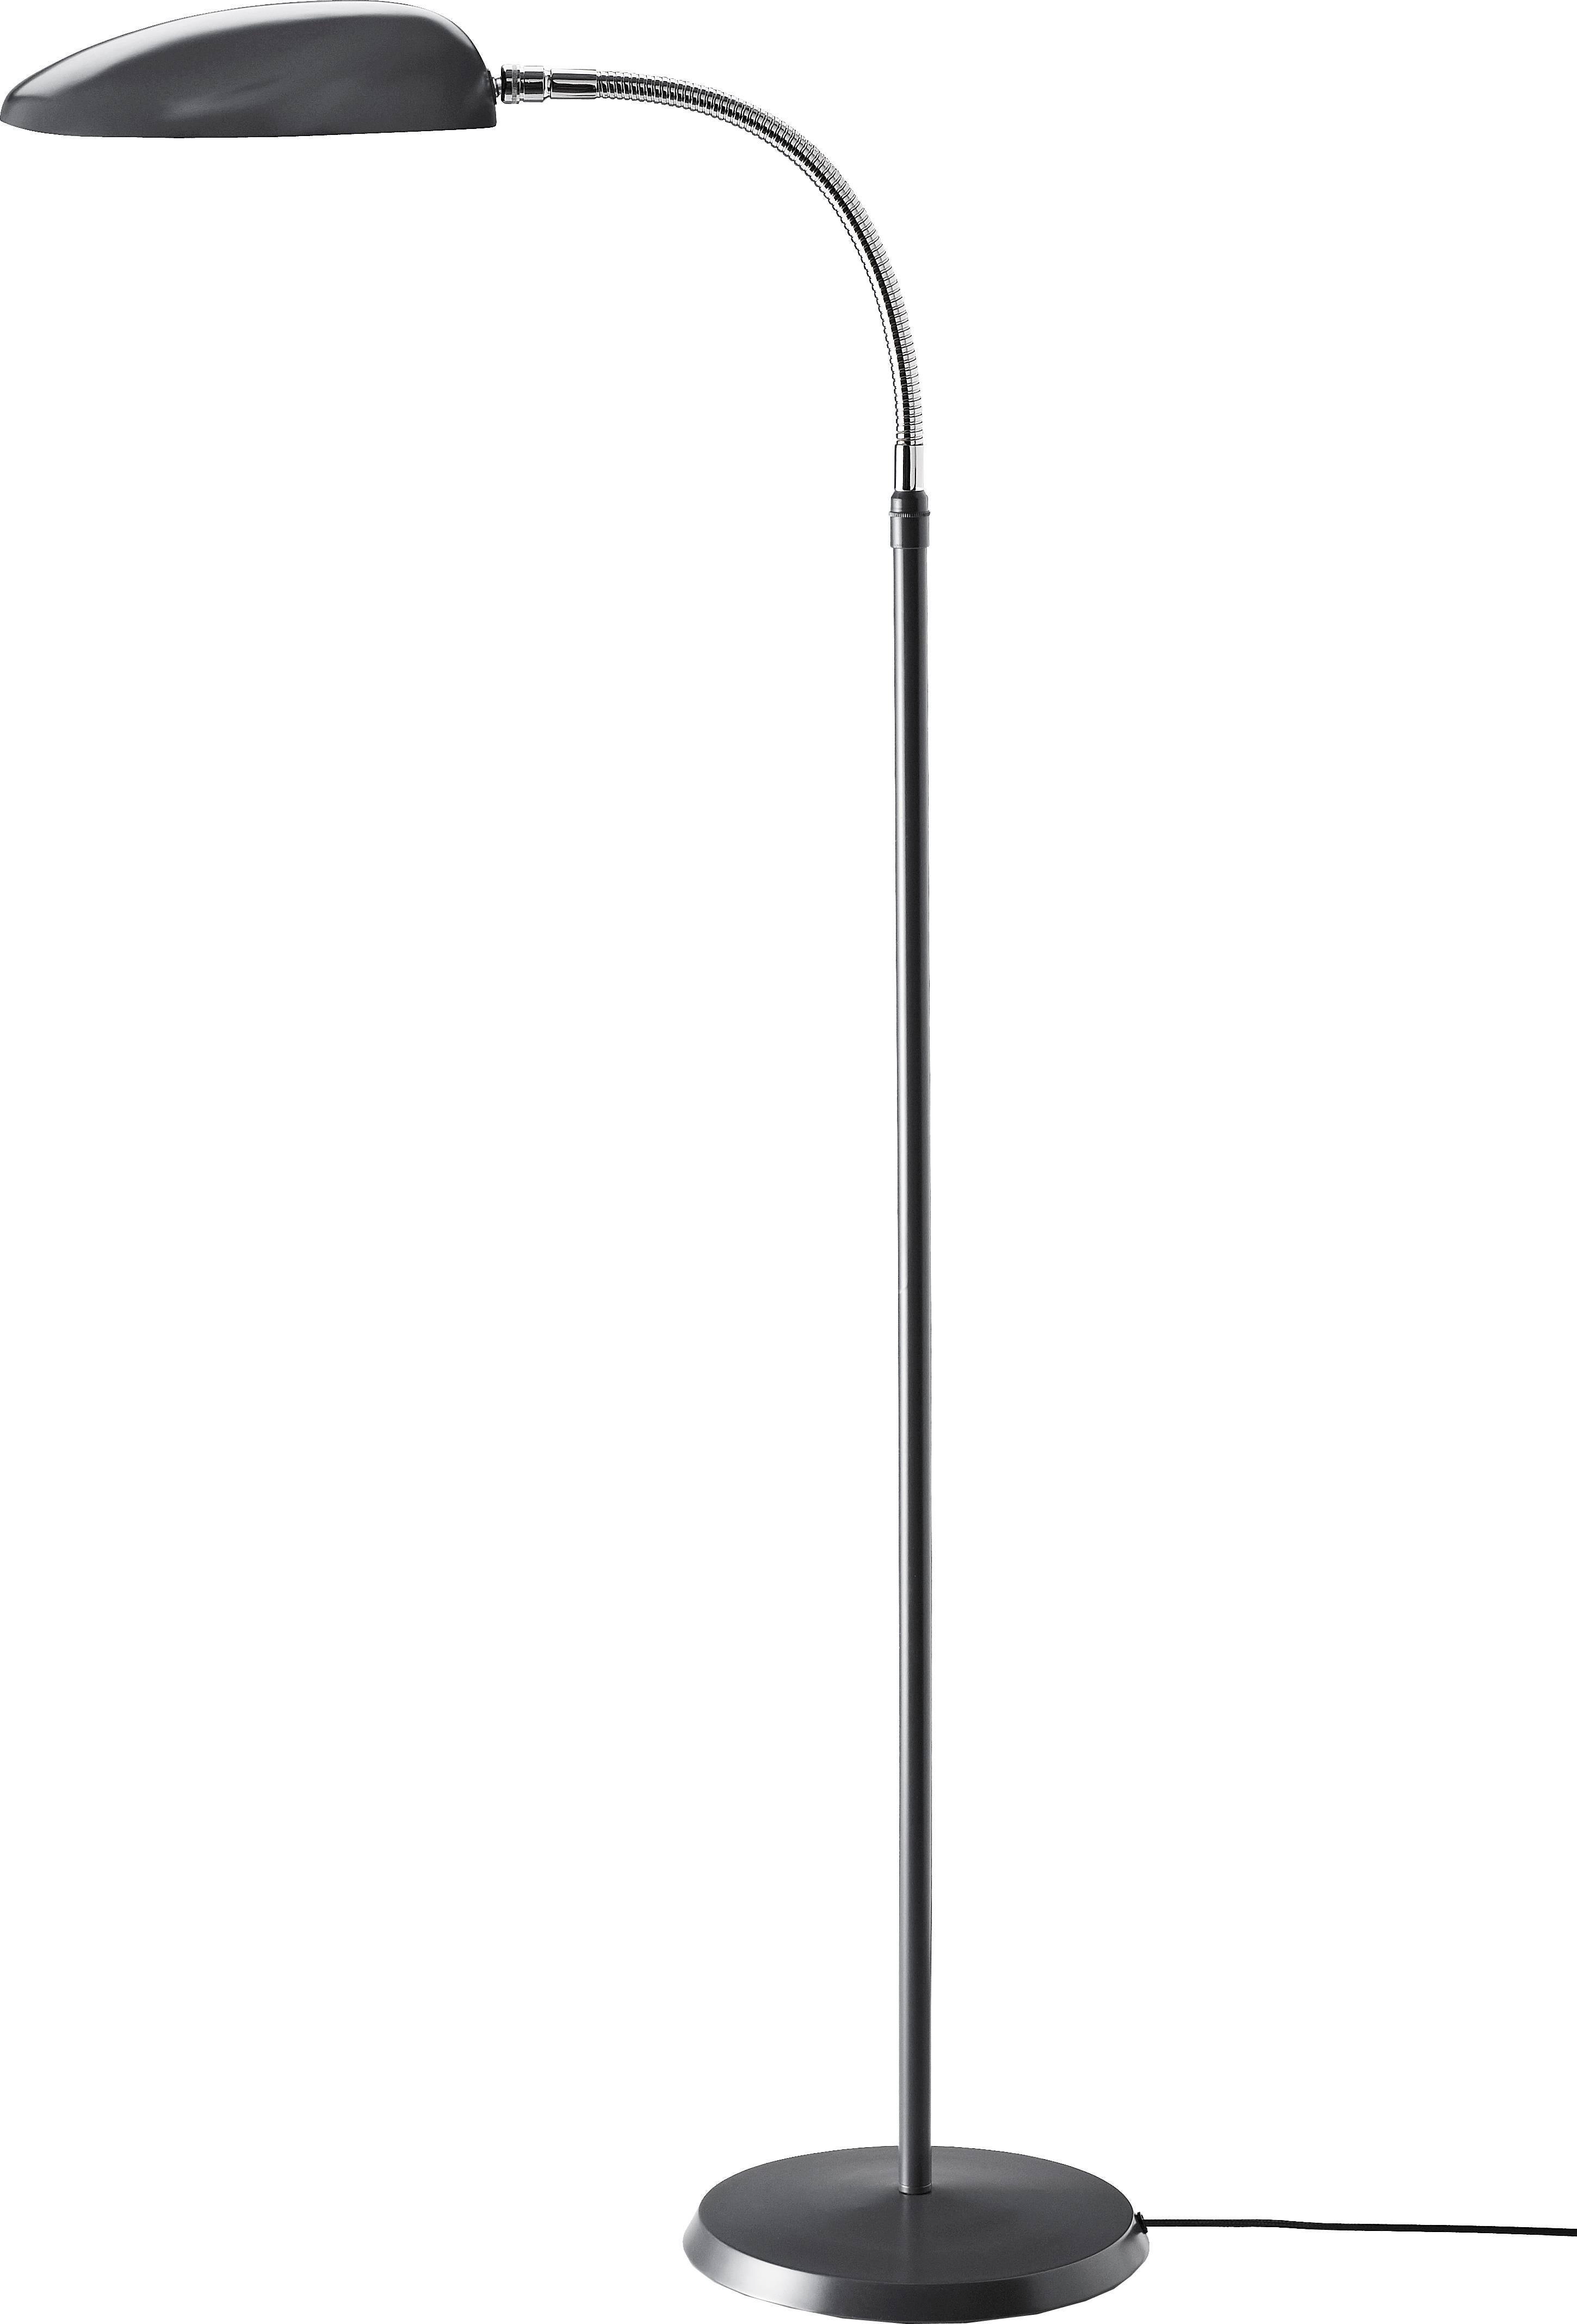 Greta Magnusson Grossman 'Cobra' floor lamp in anthracite grey. Designed in 1950 by Grossman, this is an authorized re-edition by GUBI of Denmark who meticulously reproduces her work with scrupulous attention to detail and materials that are